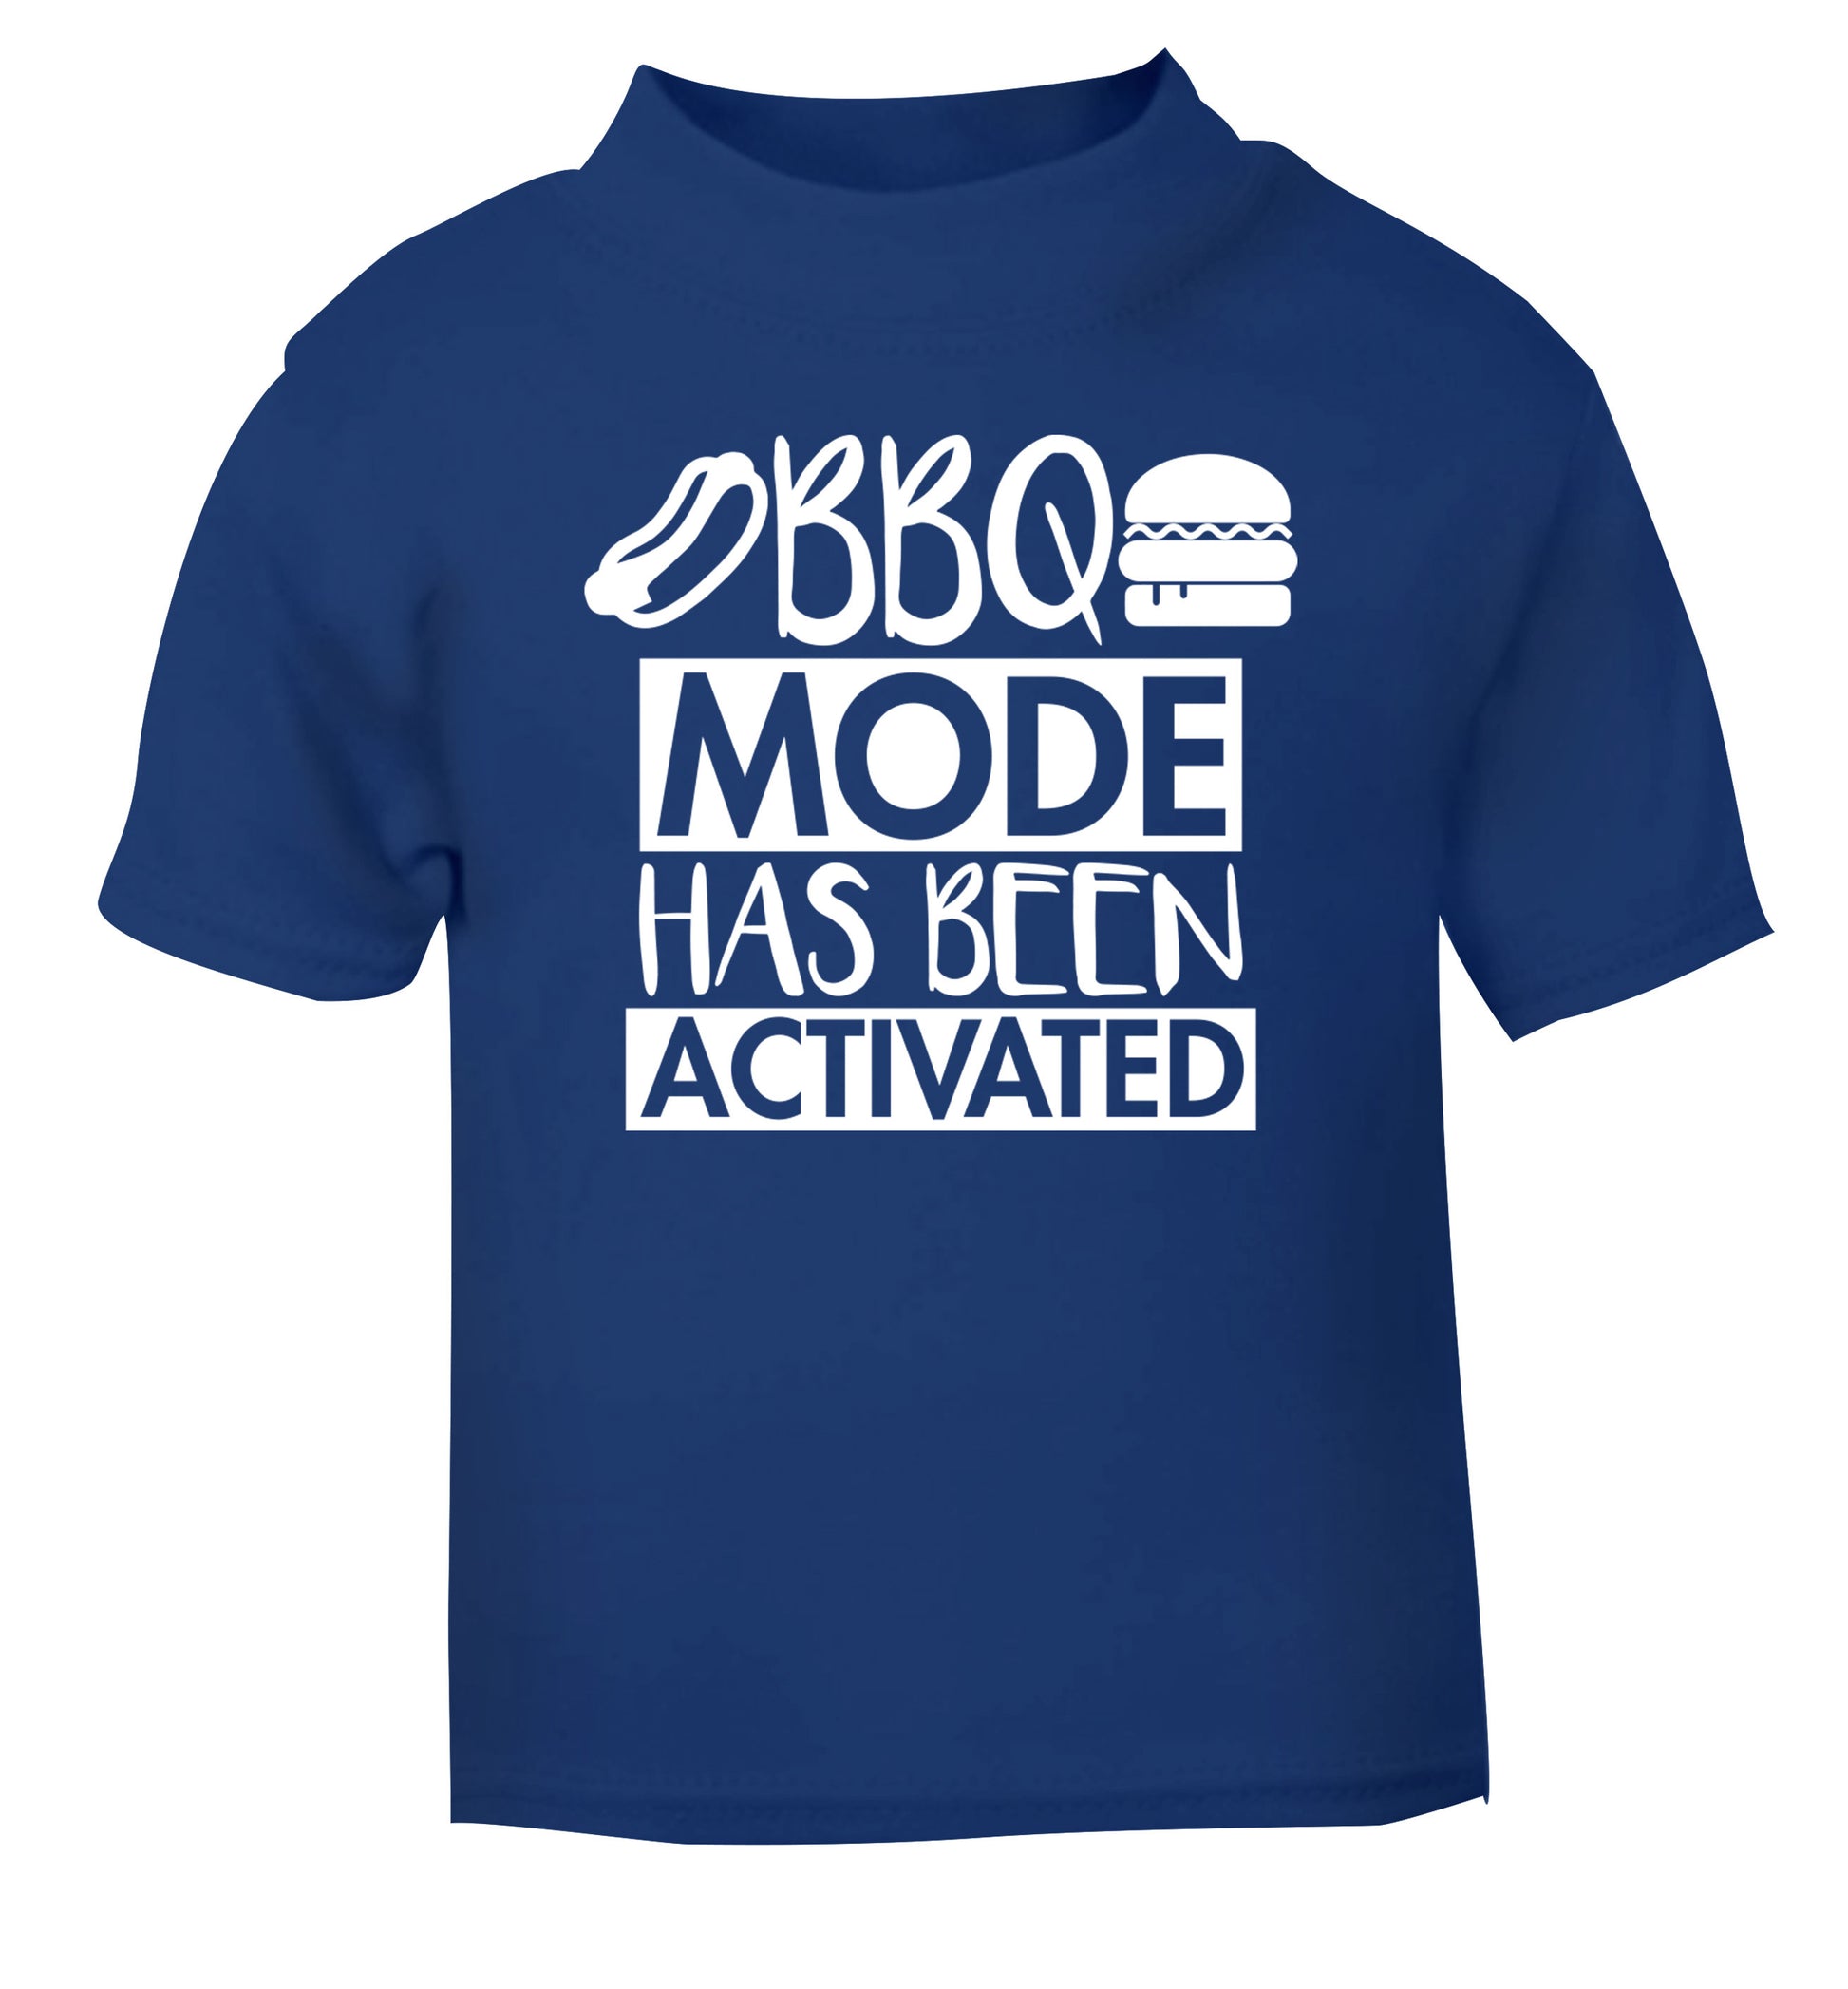 Bbq mode has been activated blue Baby Toddler Tshirt 2 Years